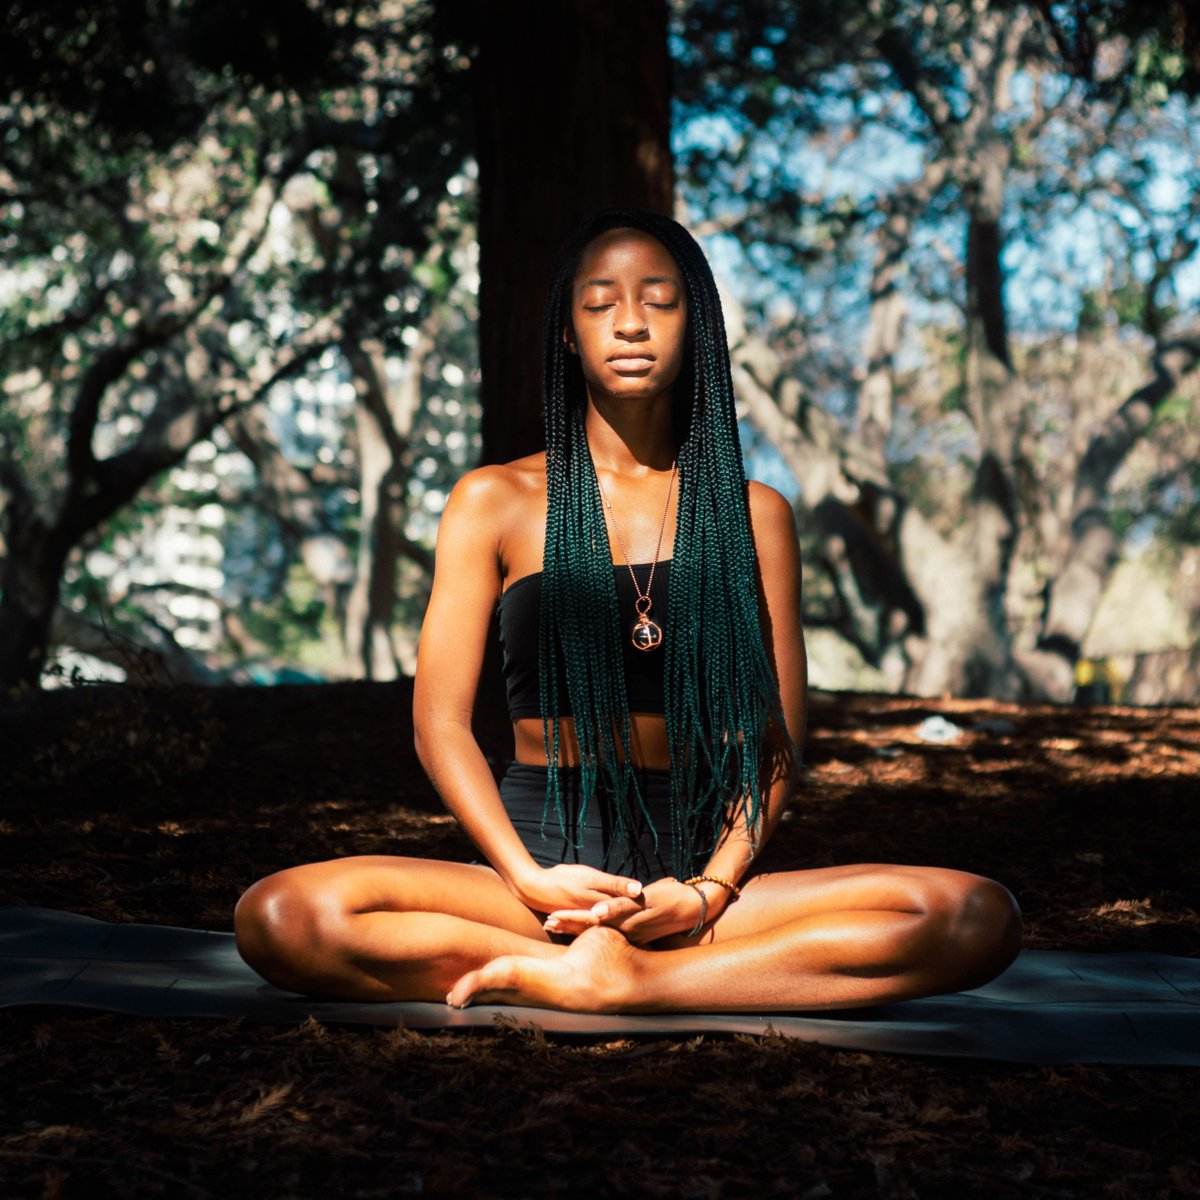 Try a quick meditation or deep breathing exercise to relax your mind and body. You'll feel refreshed and ready to tackle your next exam. #FirebirdFinals #UDC1851 #UDCFirebirds